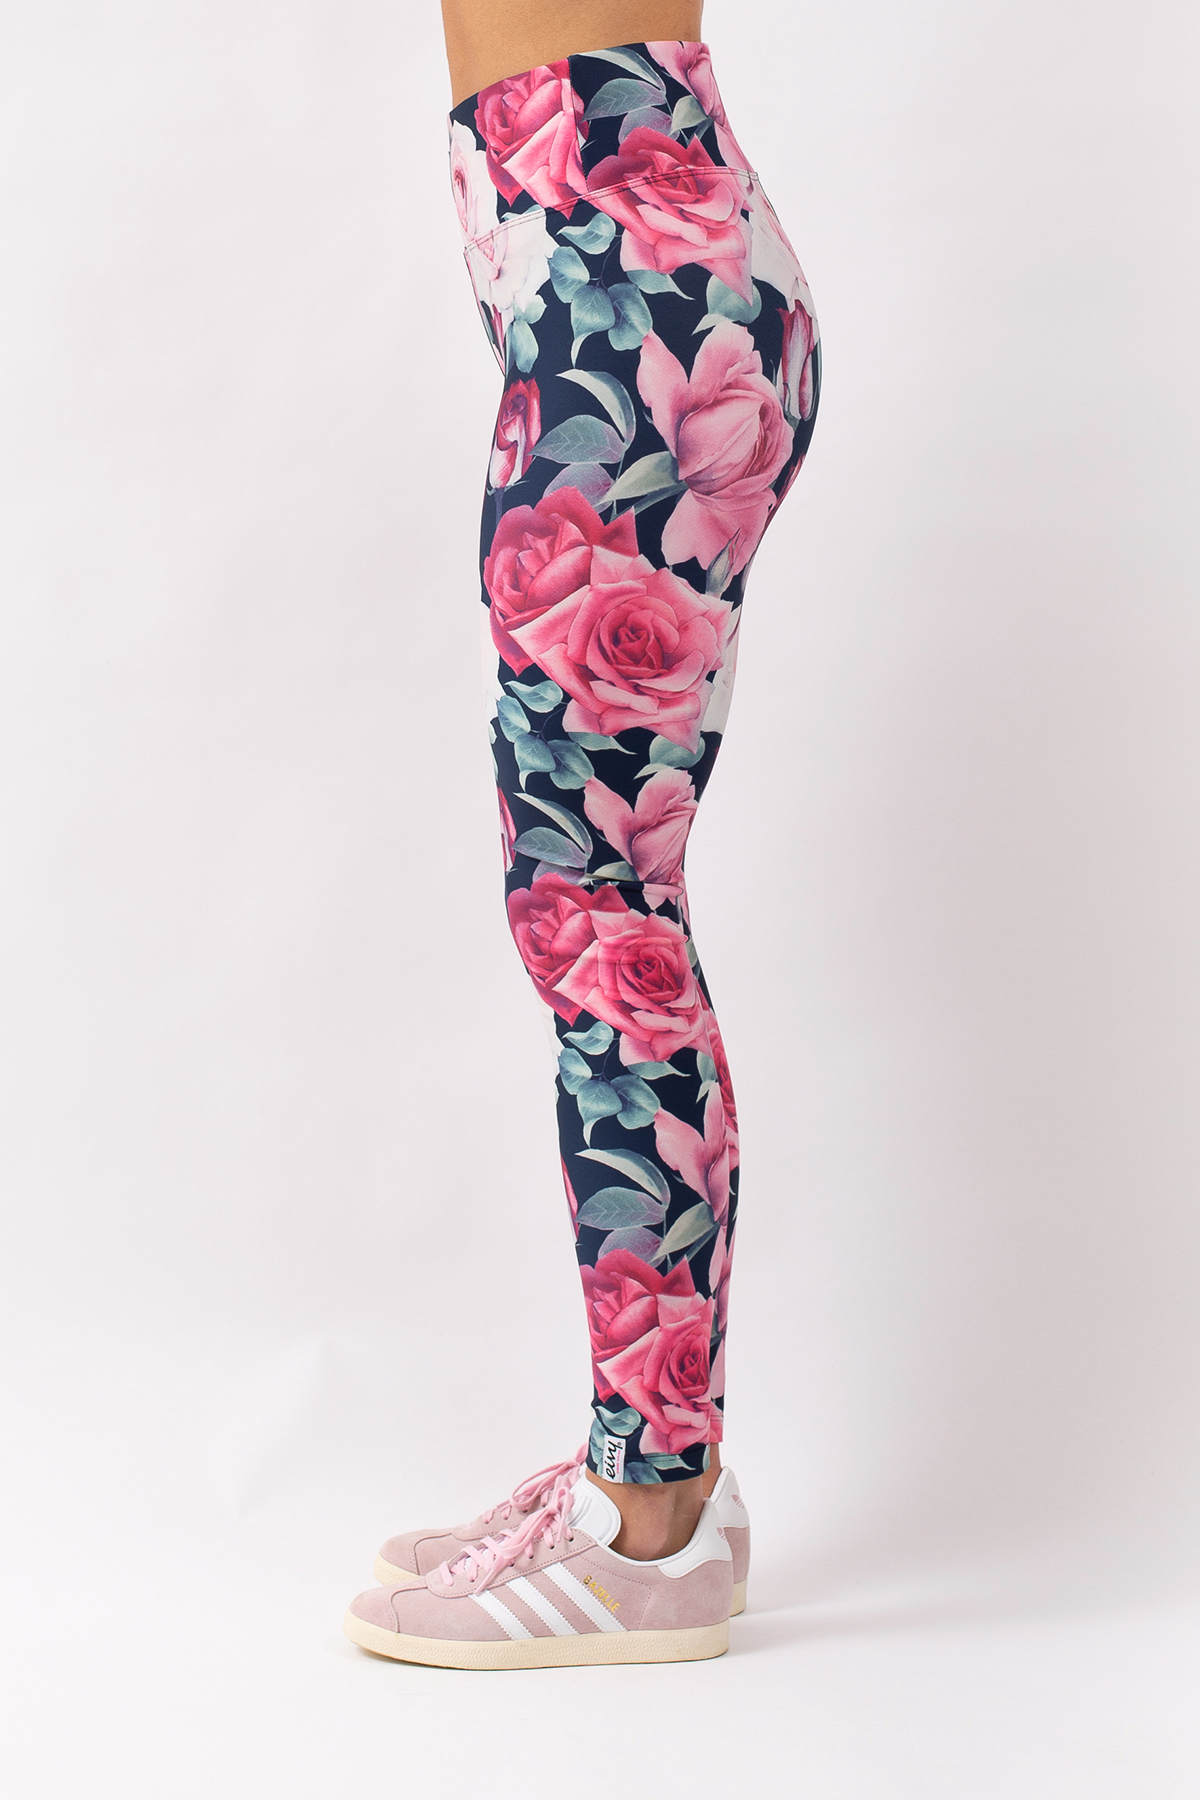 Base Layer | Icecold Tights - Winter Blossom | XL